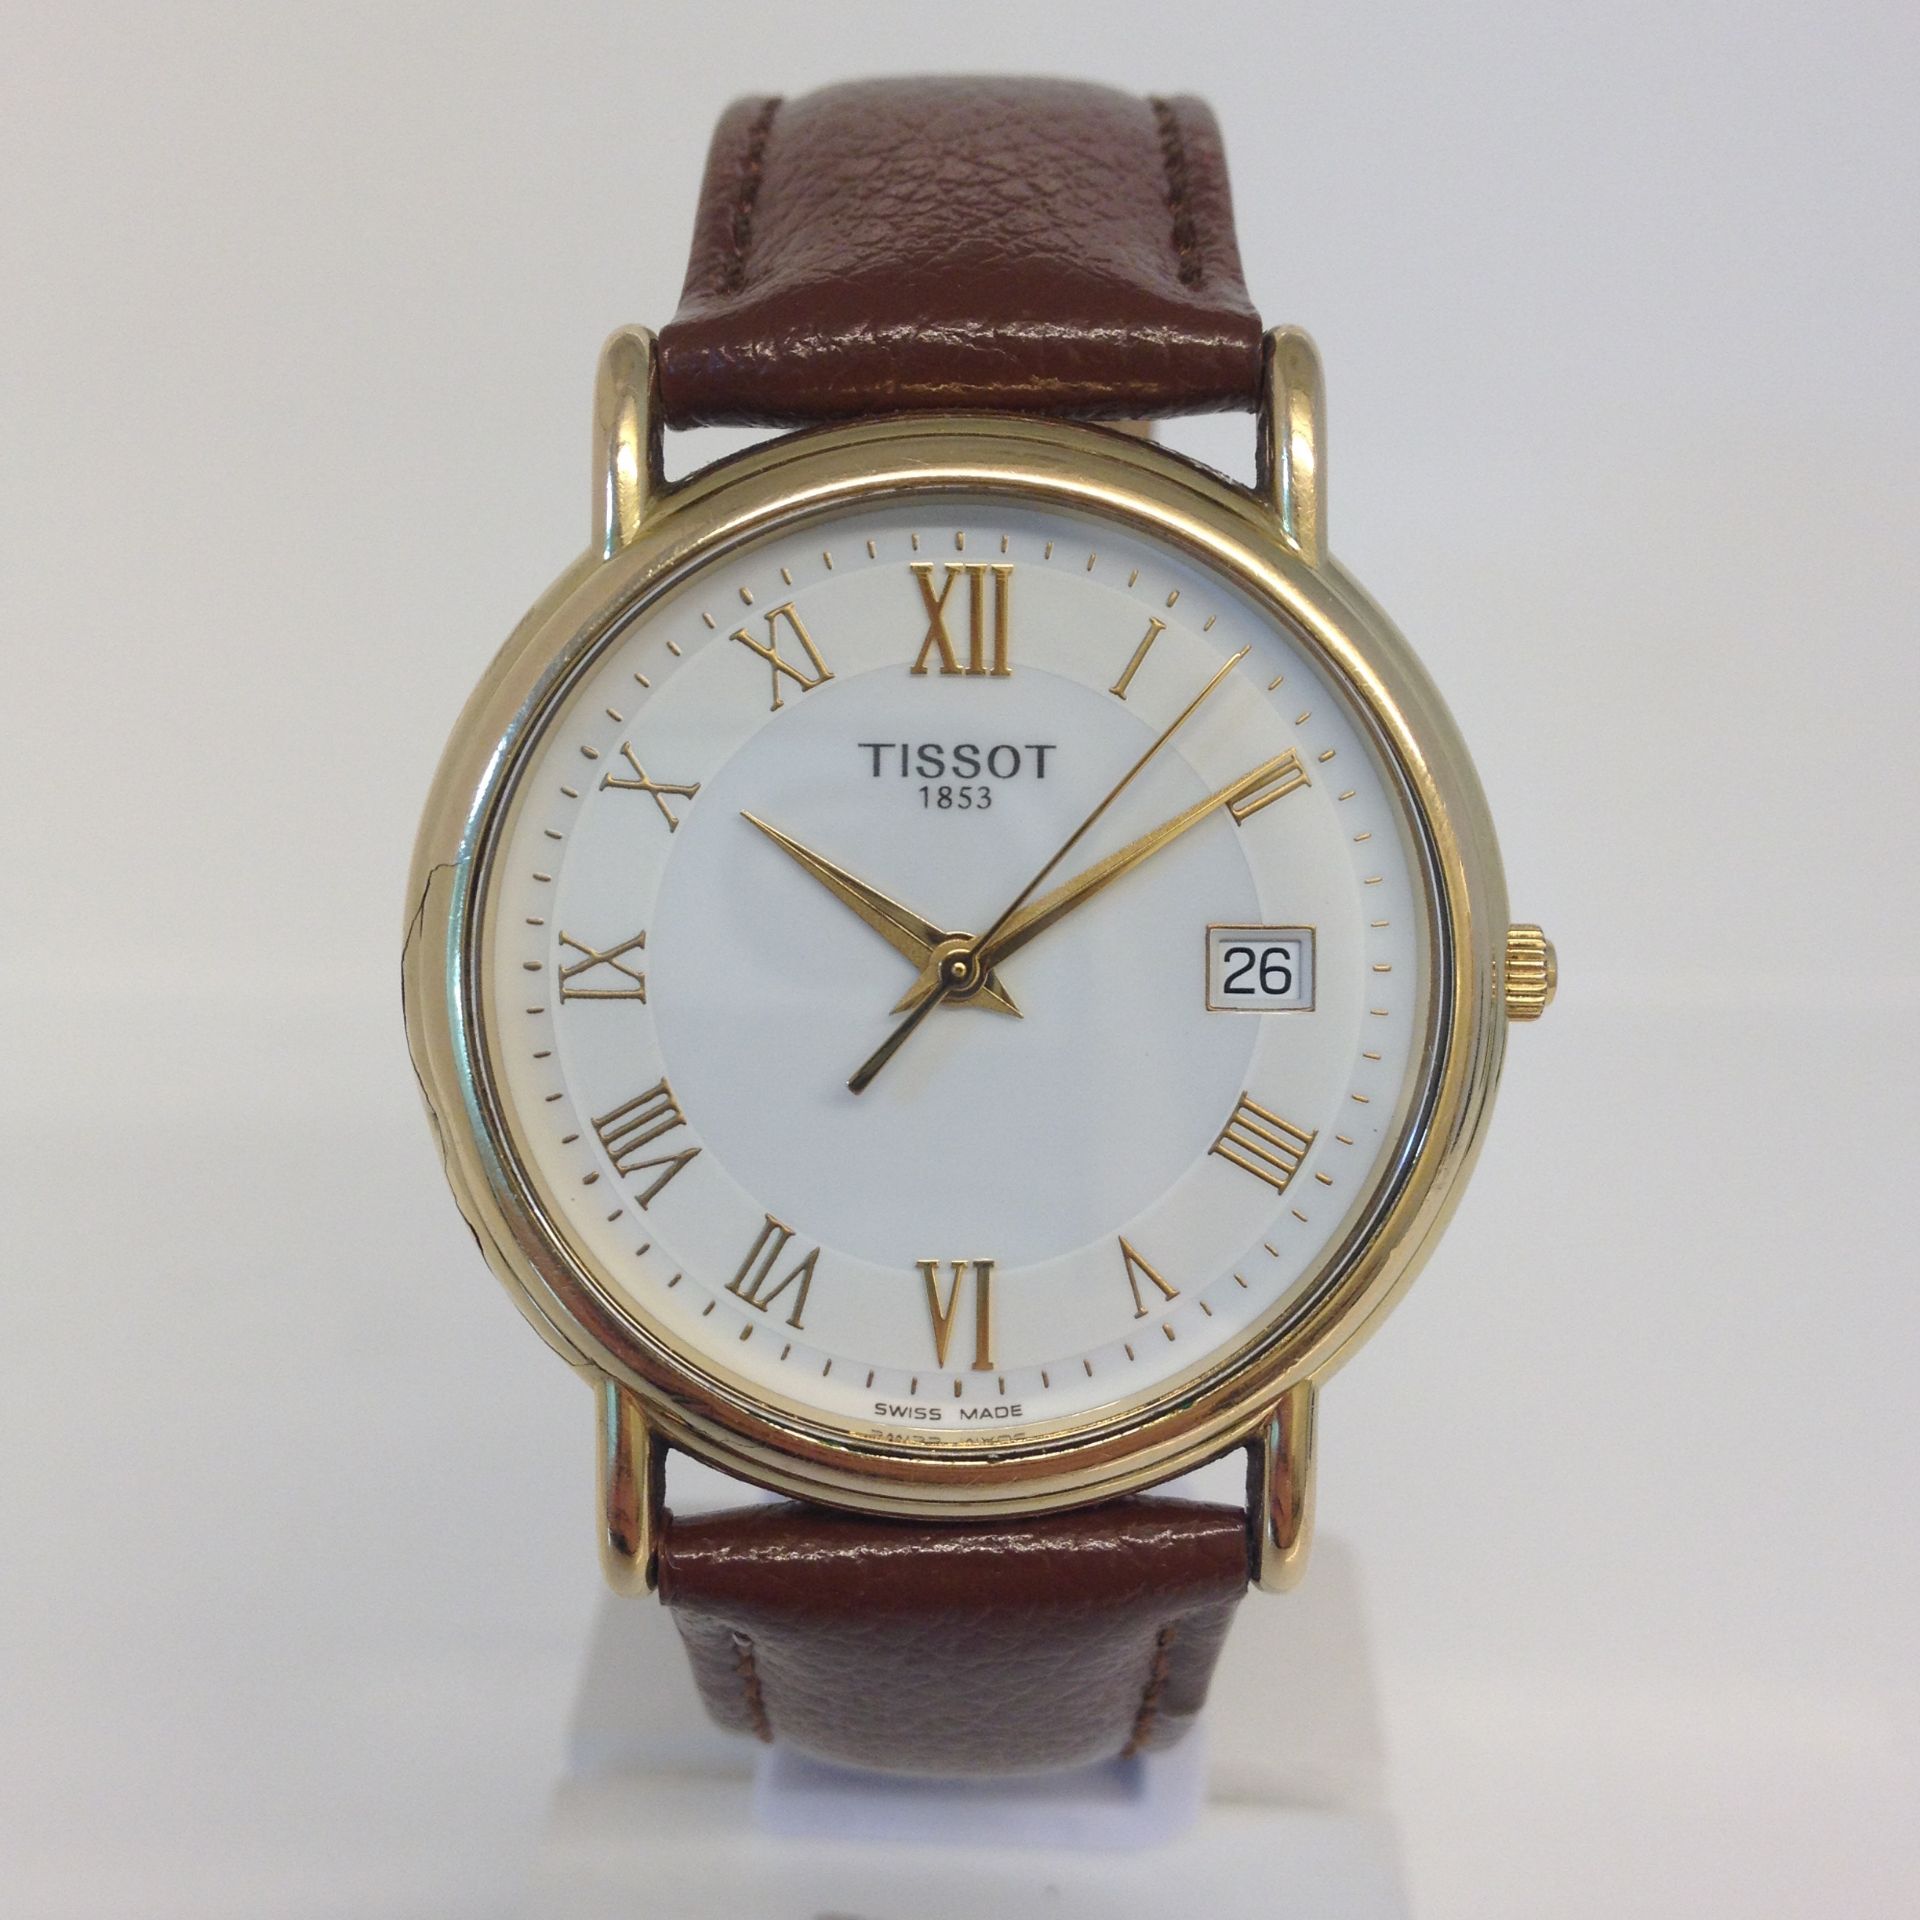 18ct Gold gts Tissot watch - Image 3 of 3